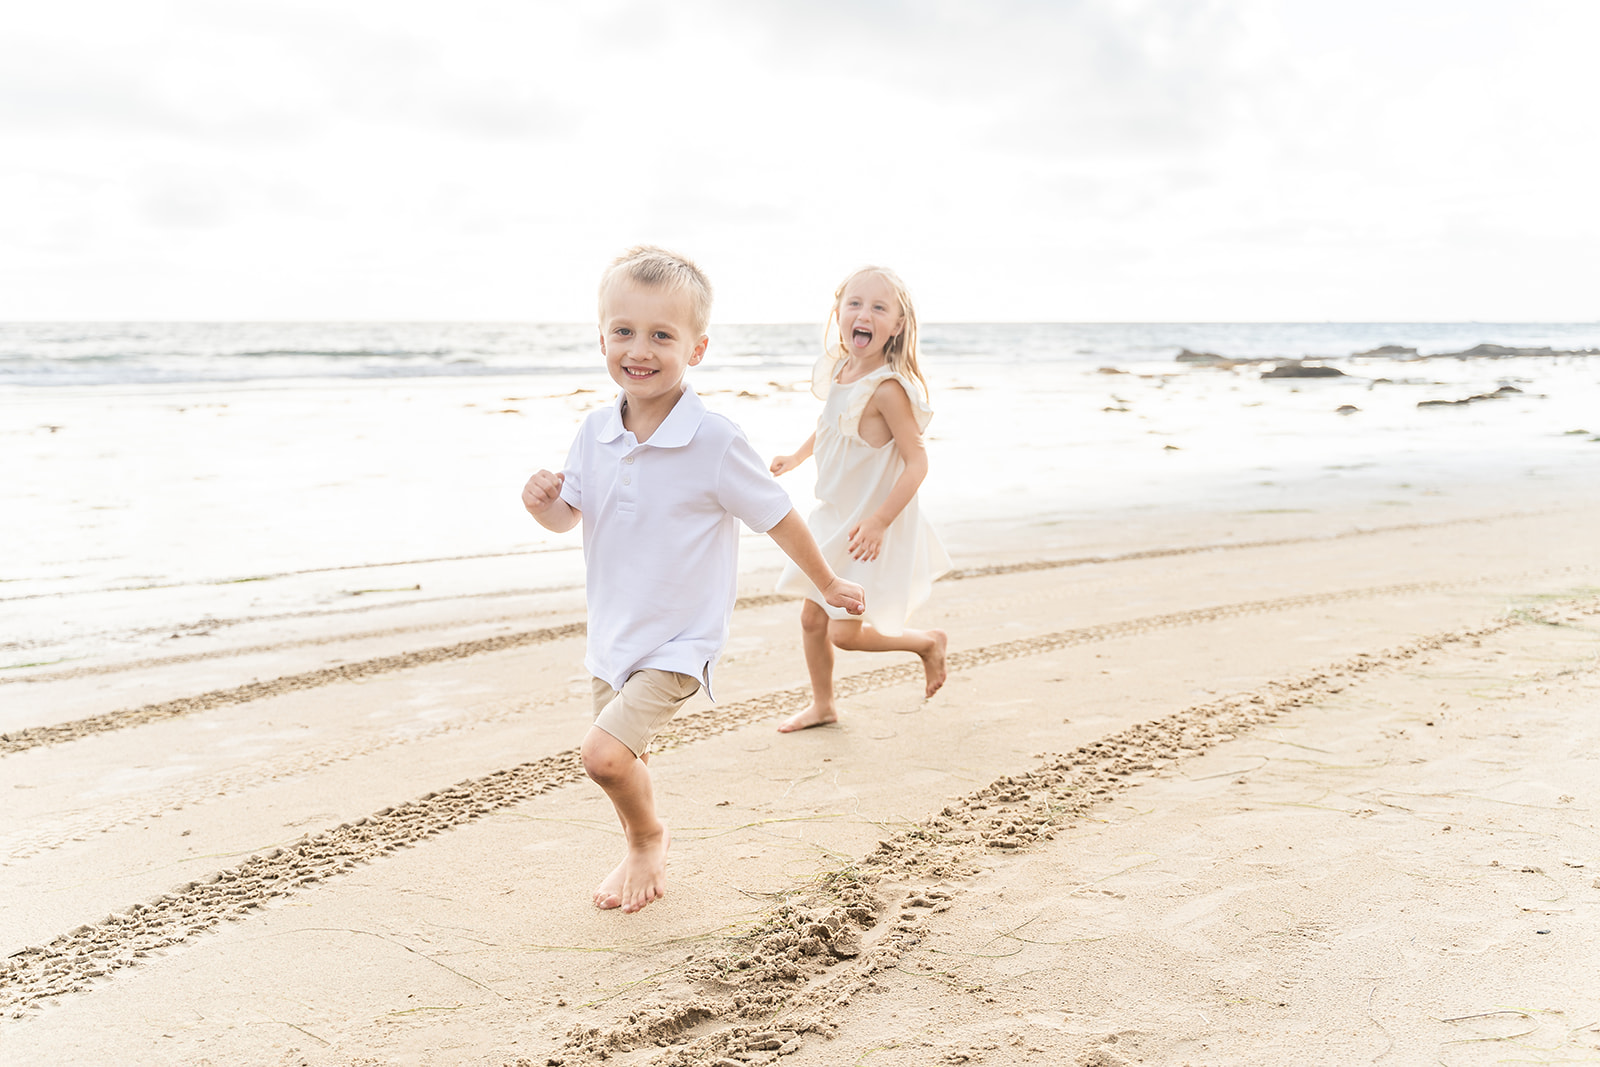 A young brother and sister run together on a beach